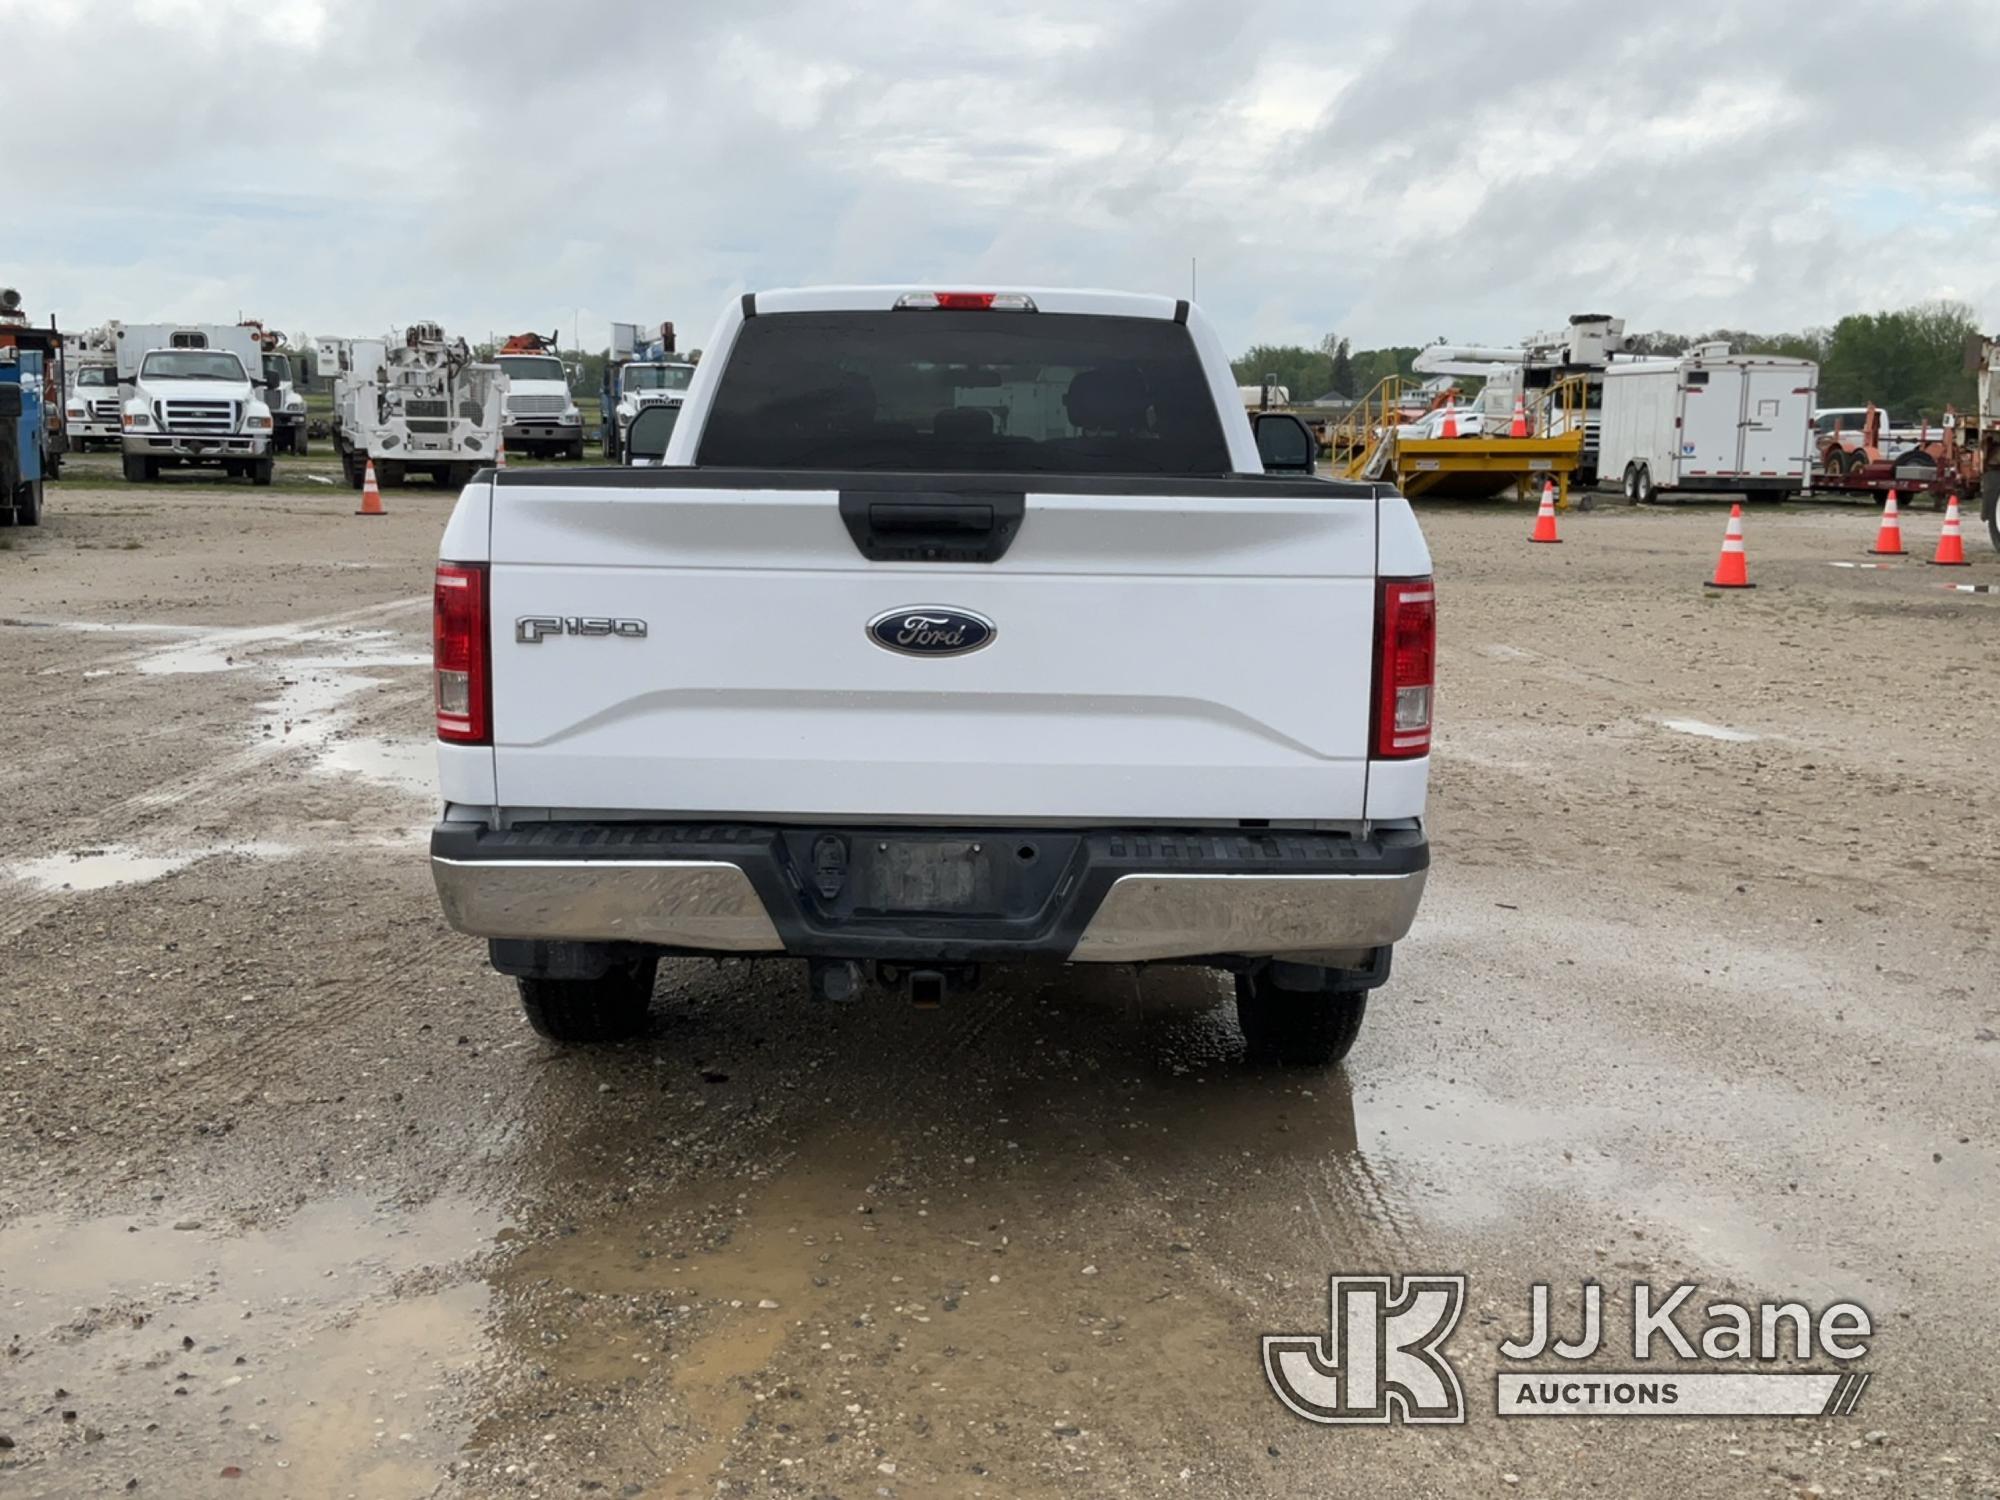 (Charlotte, MI) 2016 Ford F150 4x4 Extended-Cab Pickup Truck Runs, Moves